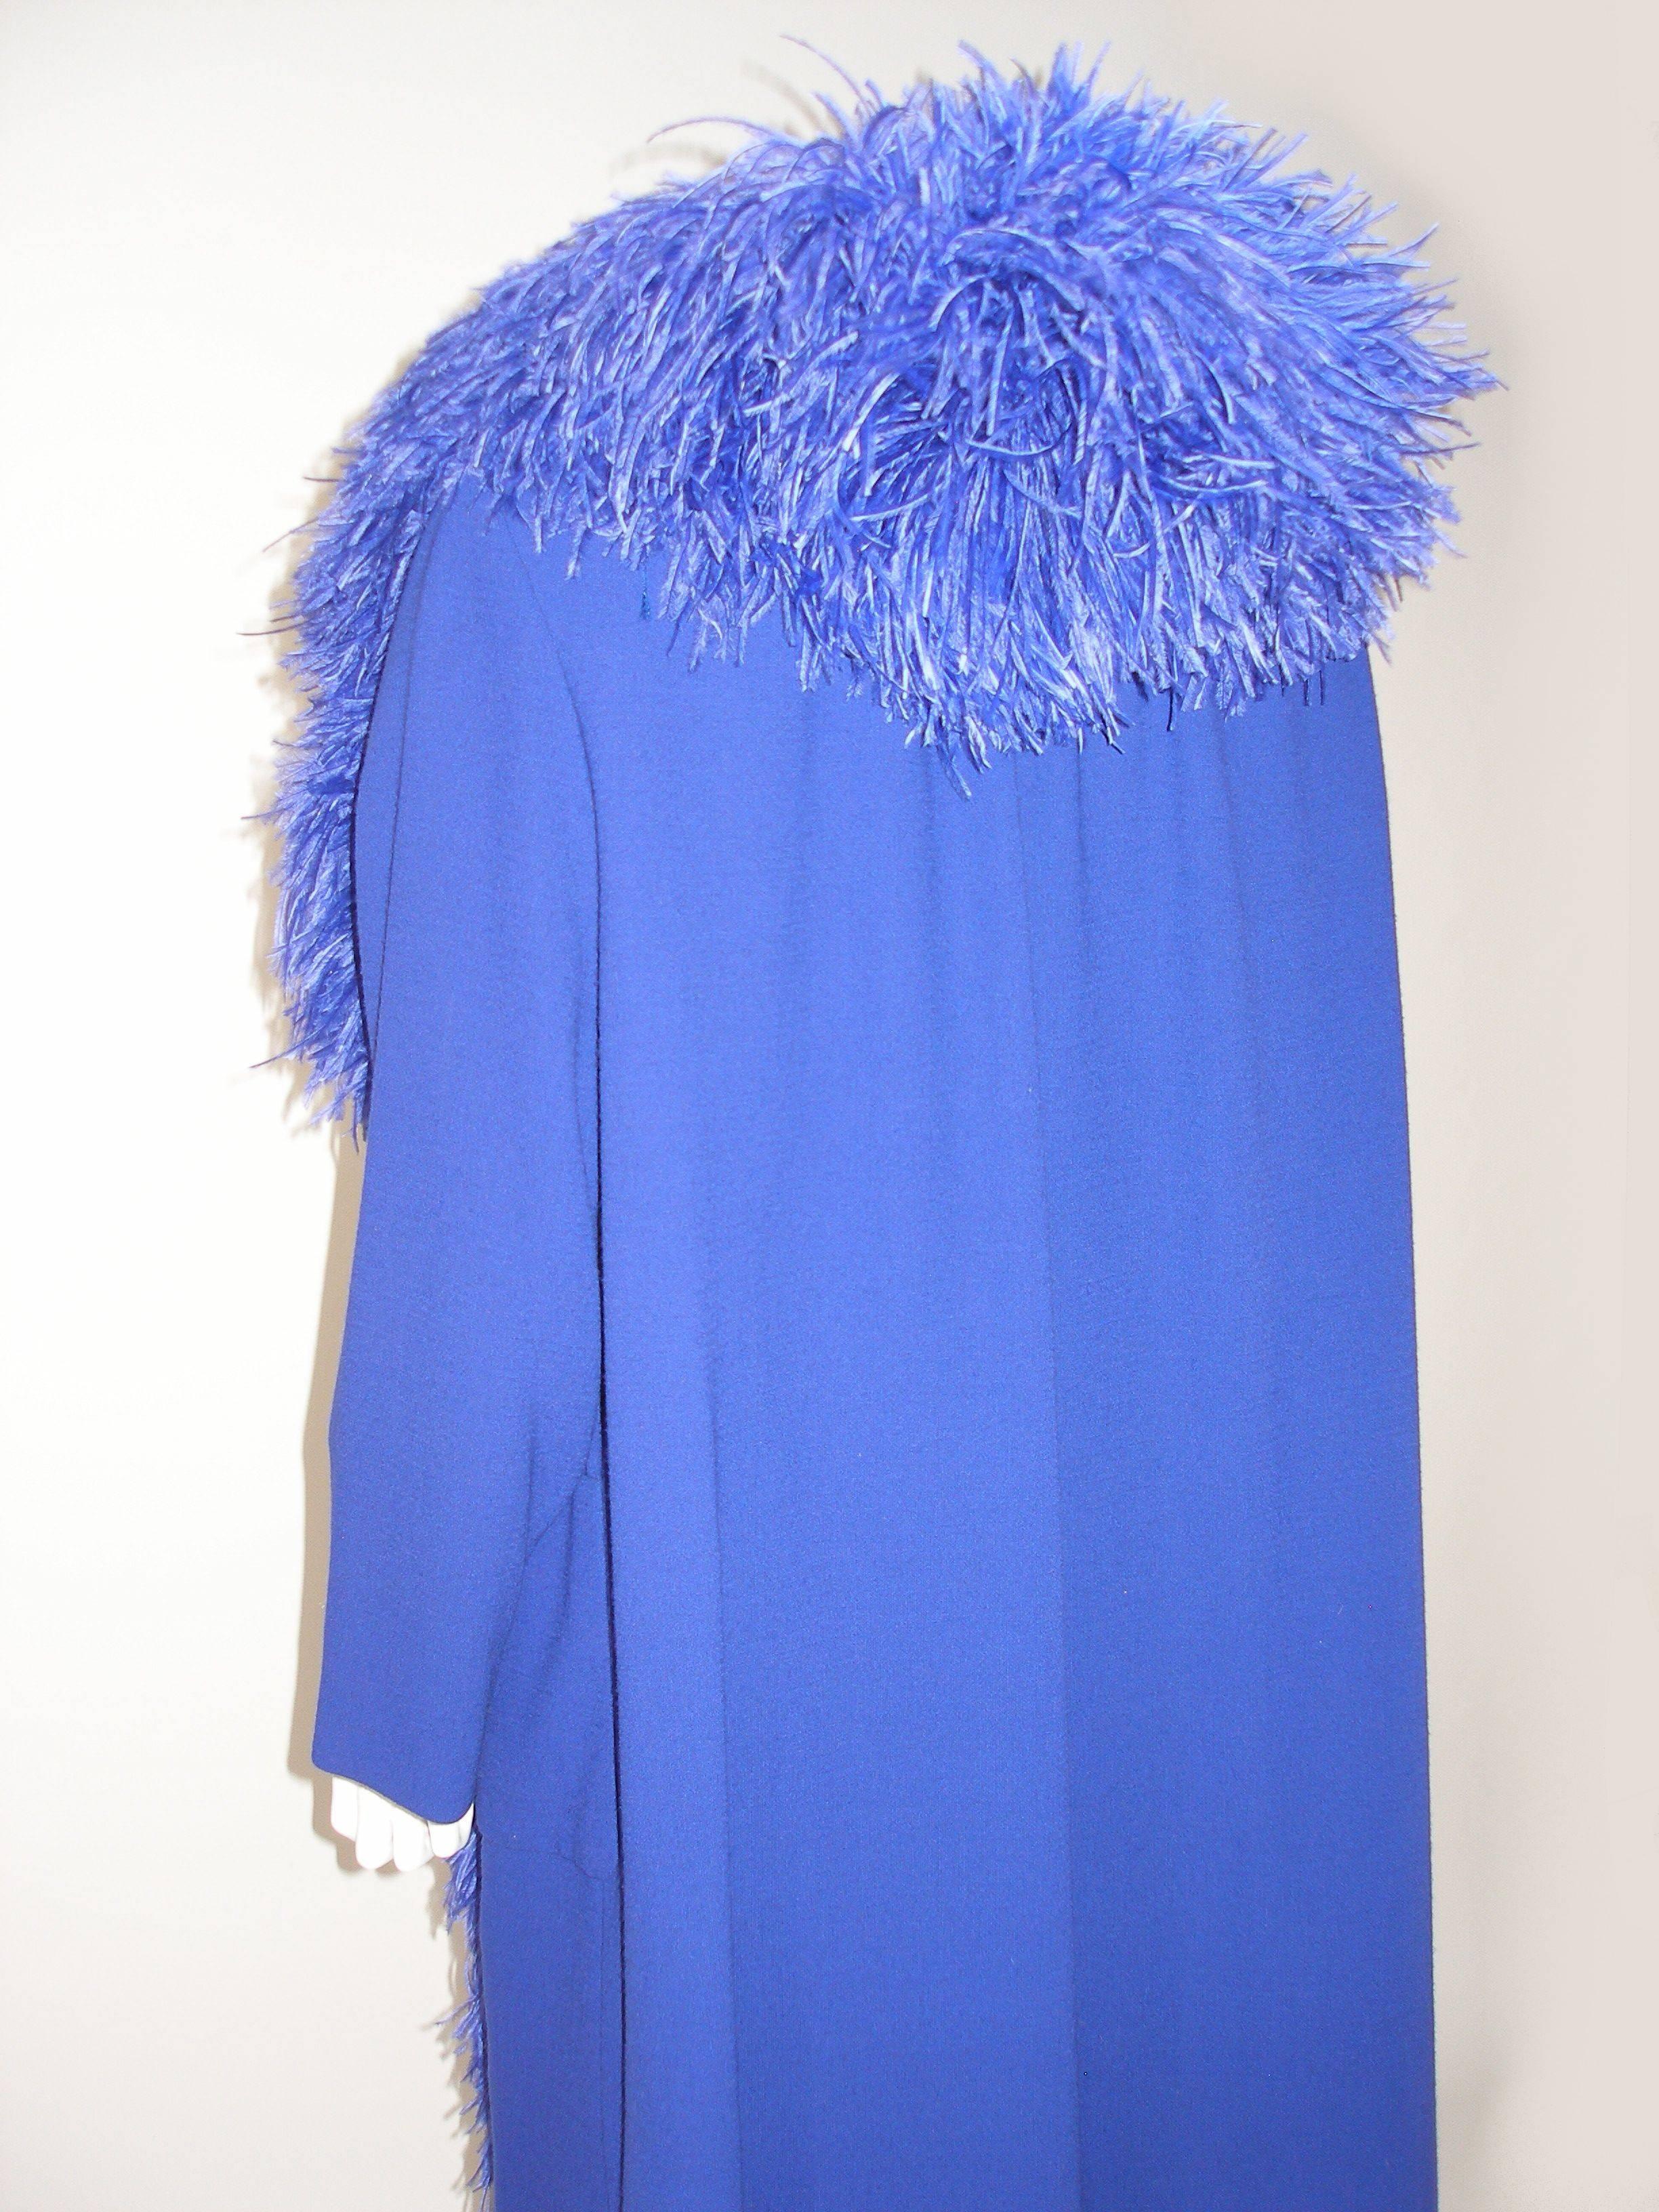 Circa 1950 Vintage Dress Coat Set Silk and Ostrich Feathers Balmain Couture 36FR For Sale 2